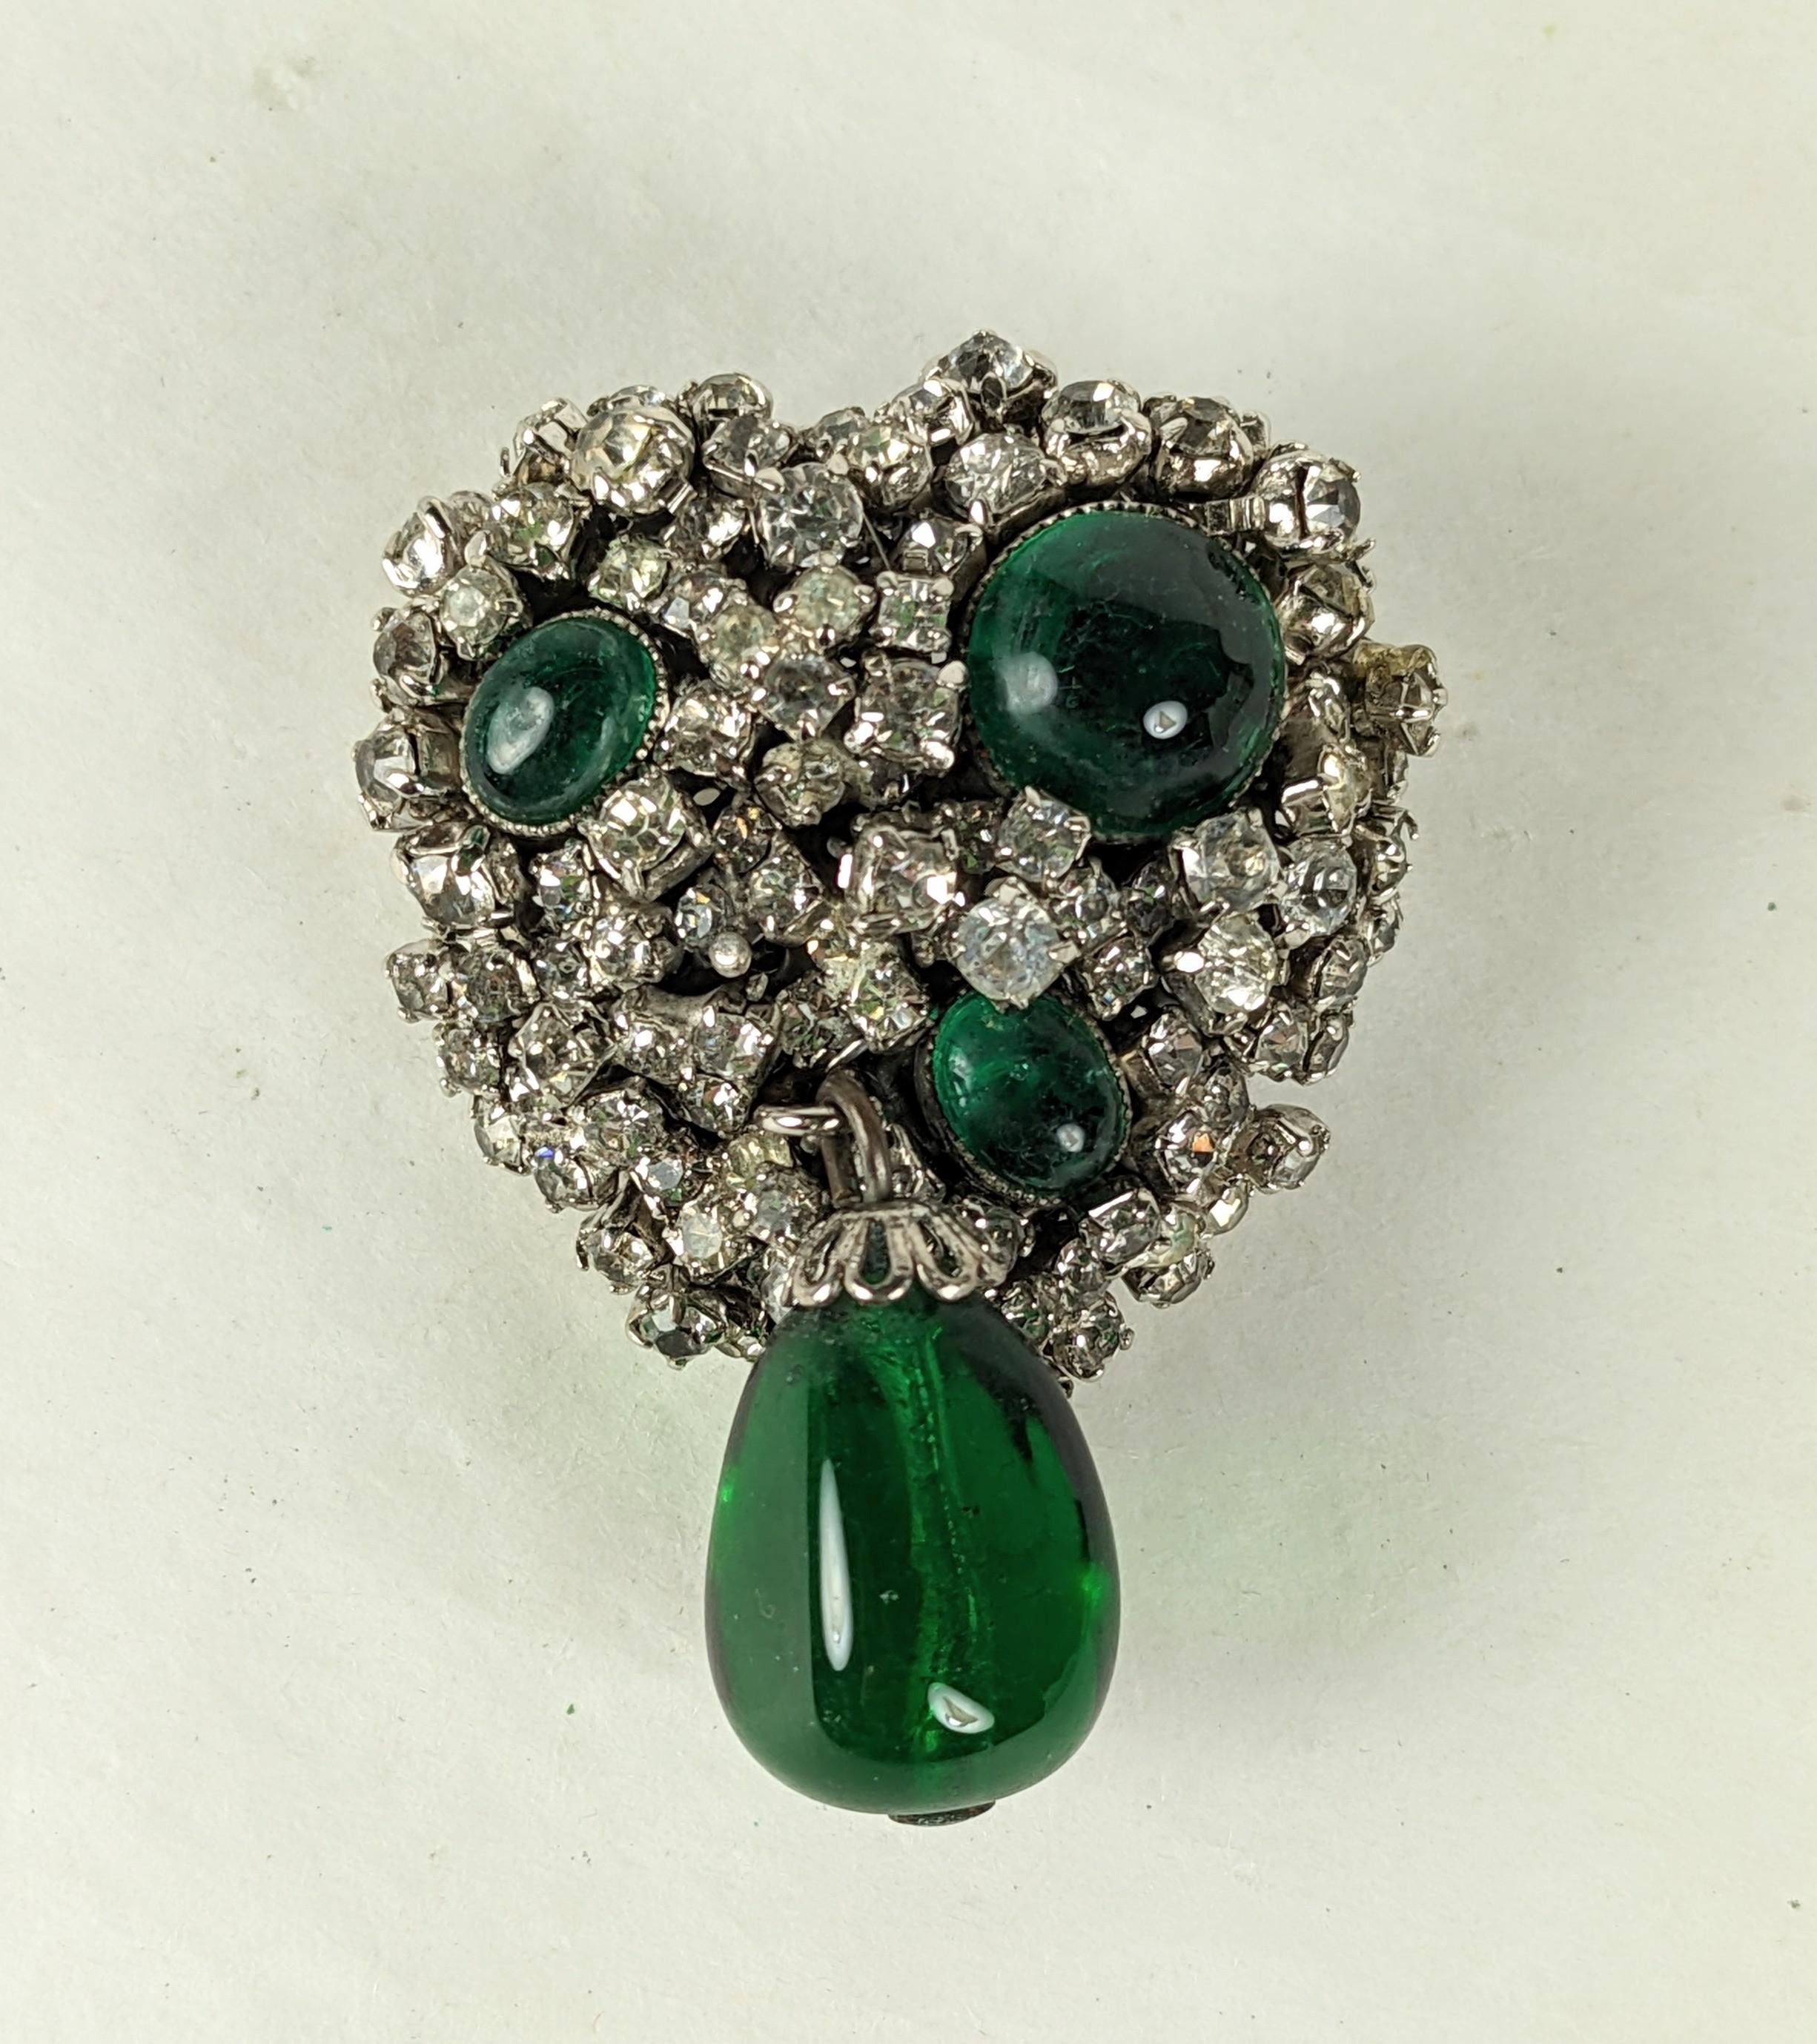 Charming DeNicola Gripoix and Paste Heart Brooch from the 1950's. Made in collaboration with Maison Gripoix in the 1950's, set in a backing of hand set pastes with emerald pate de verre drop.
1950's USA. 1.5